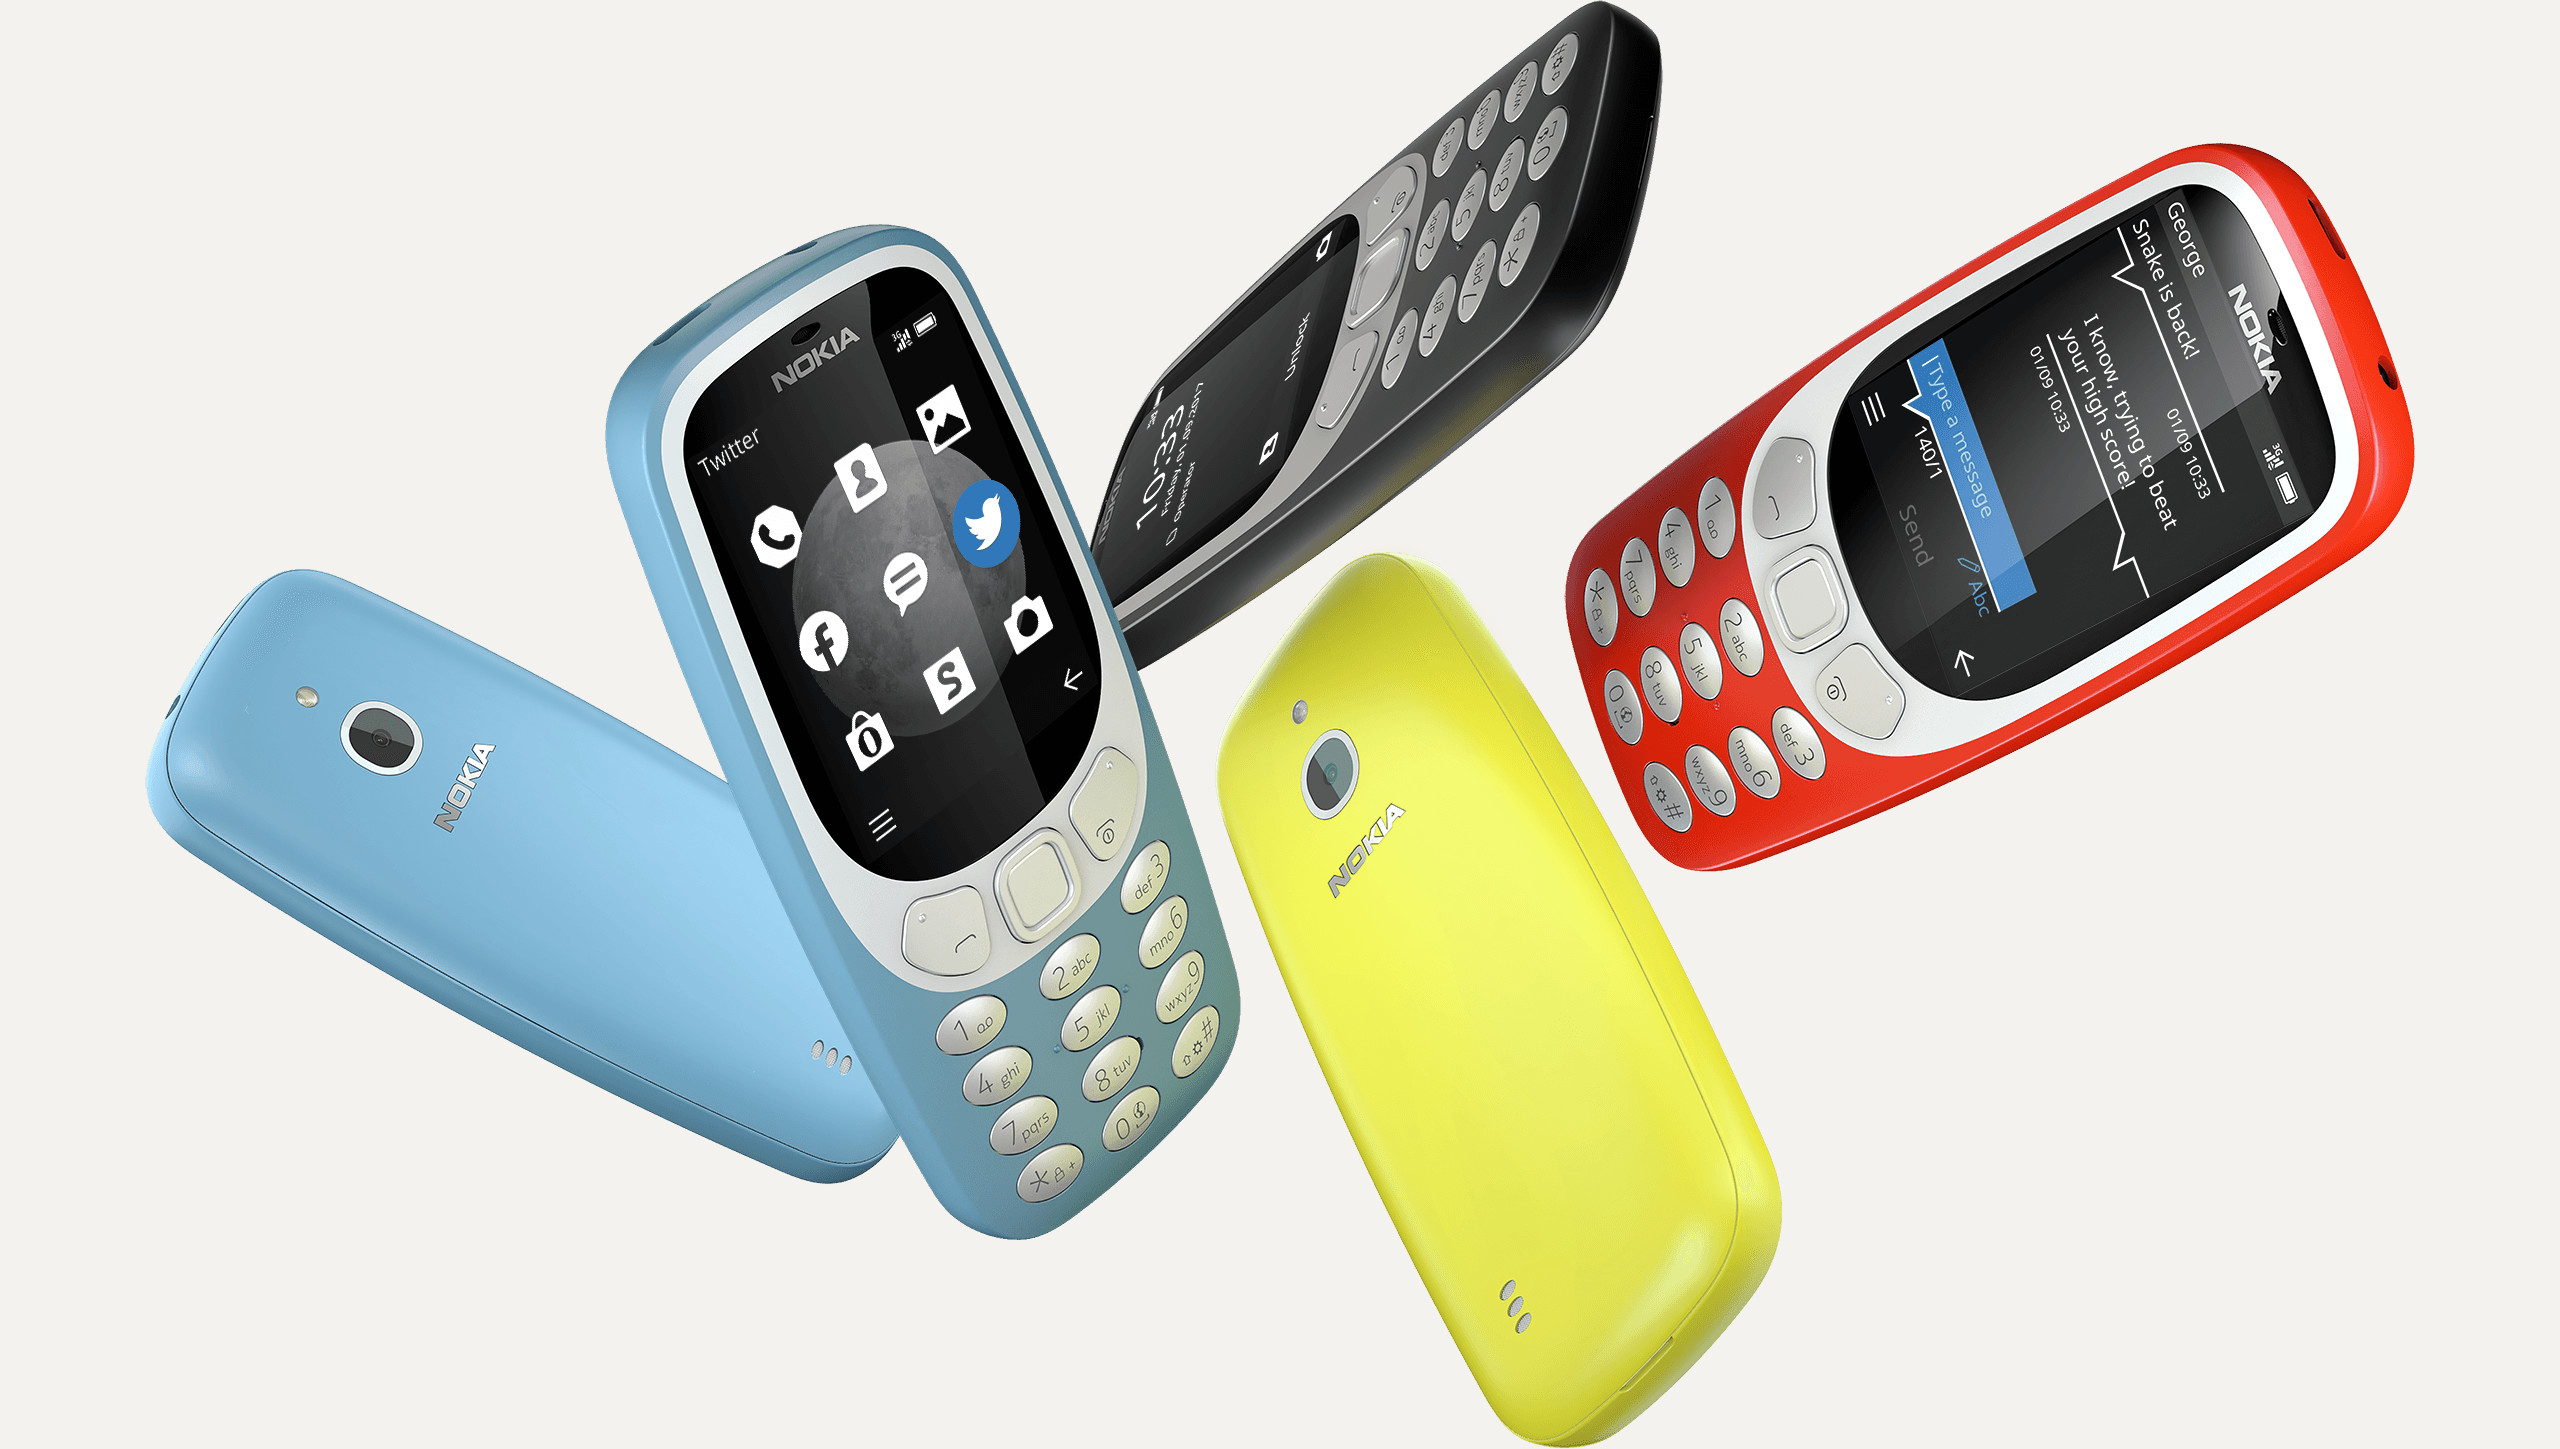 Nokia_3310_3G-the_connectivity-padding.png